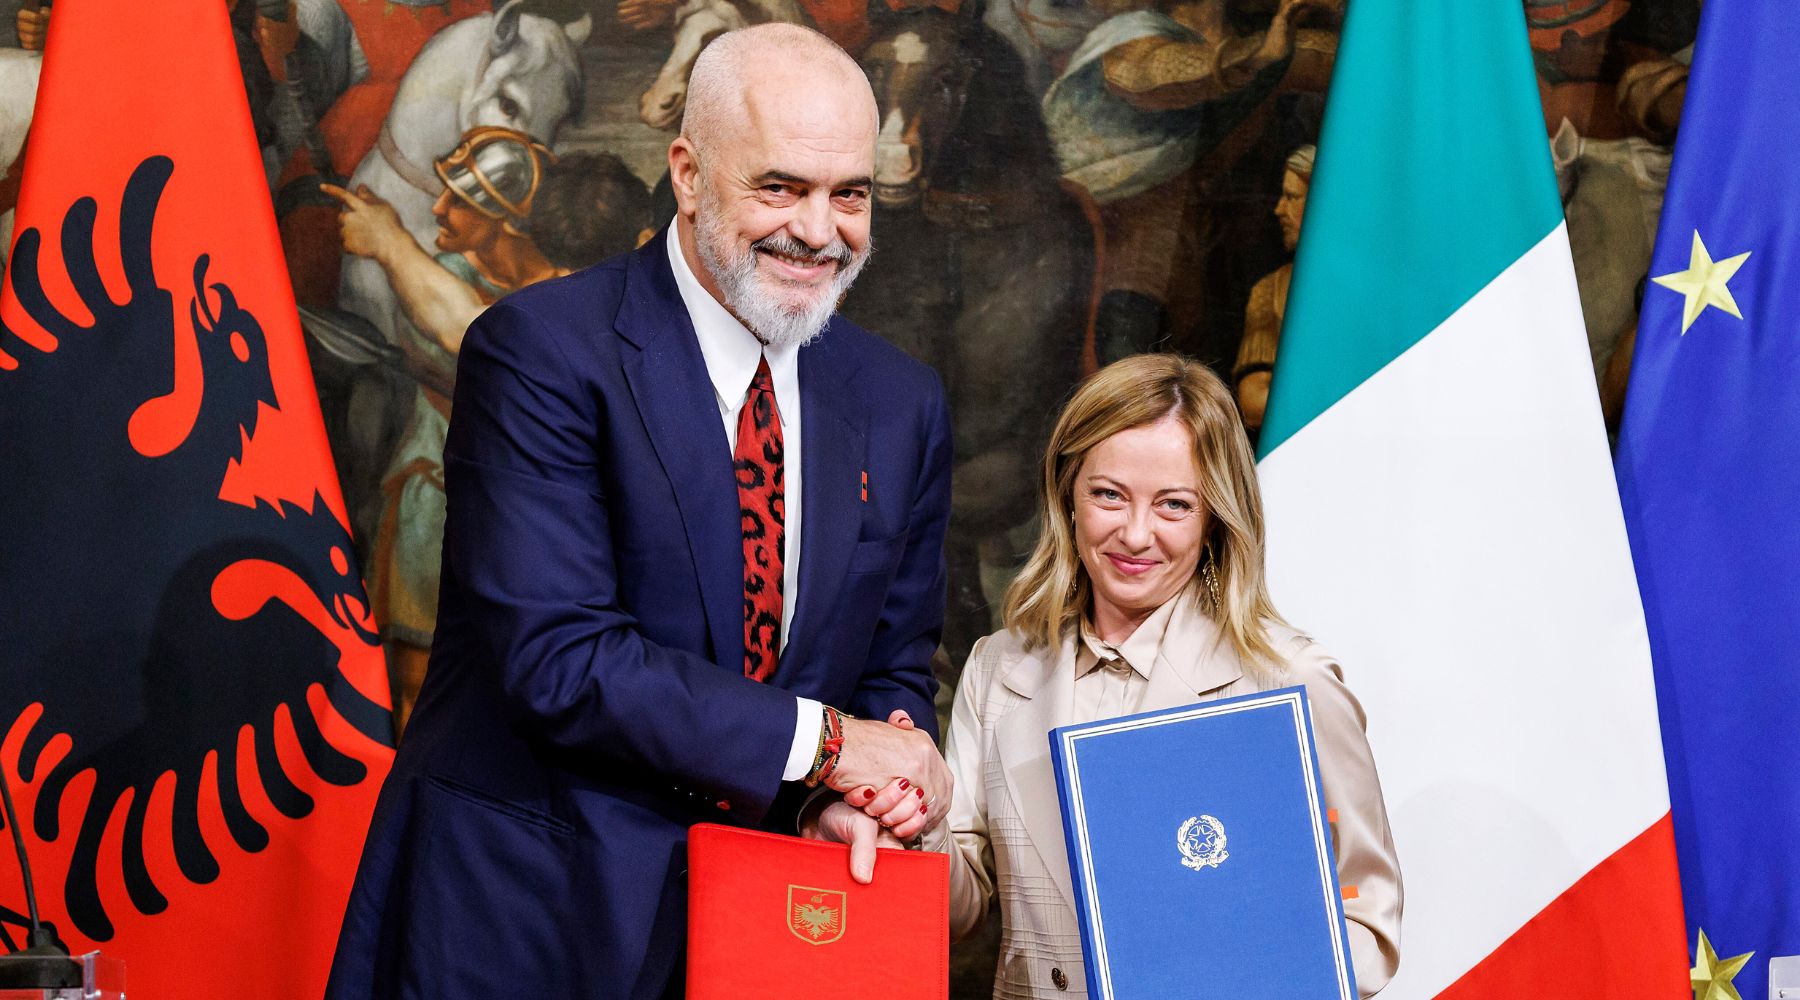 Italy has concluded an immigration agreement with Albania